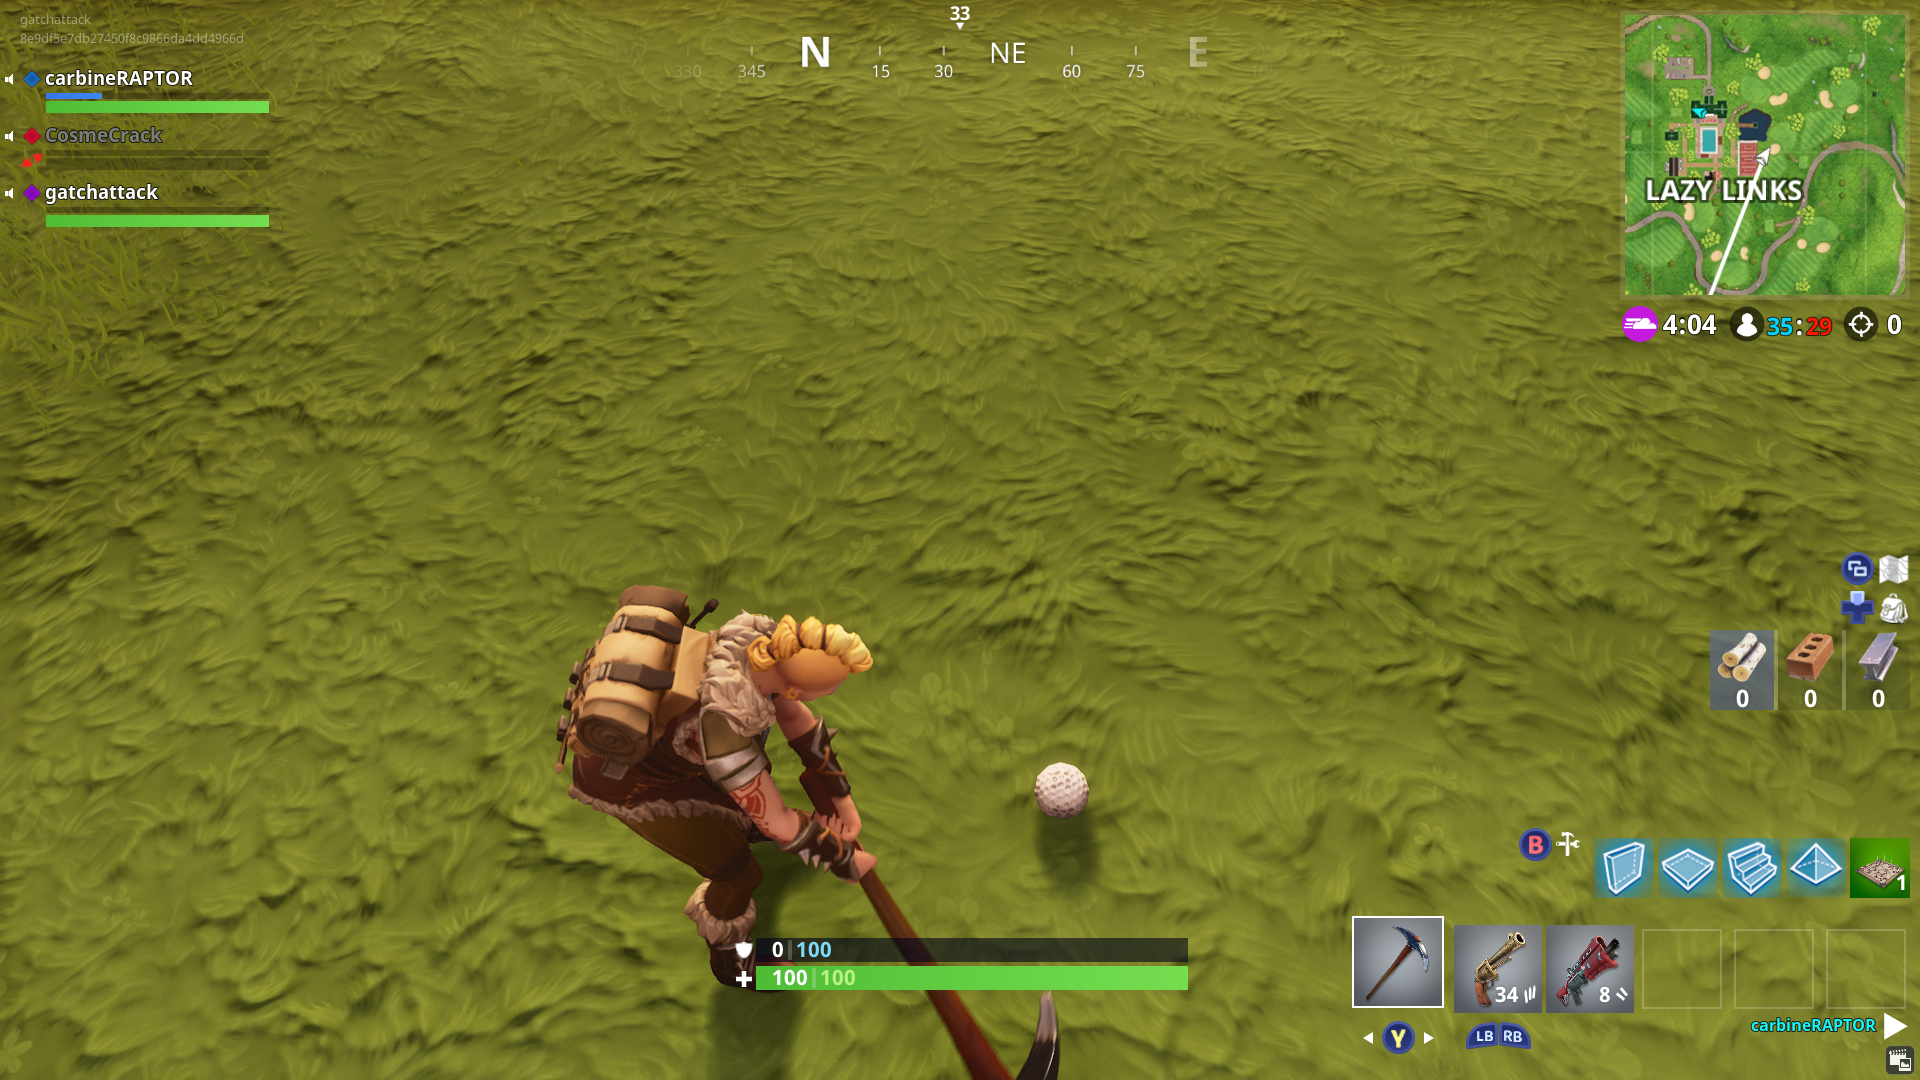 is surprisingly difficult because there s no real way to gauge how hard you ll hit it other than by trial and error screenshot epic games fortnite - how to hit golf ball in fortnite